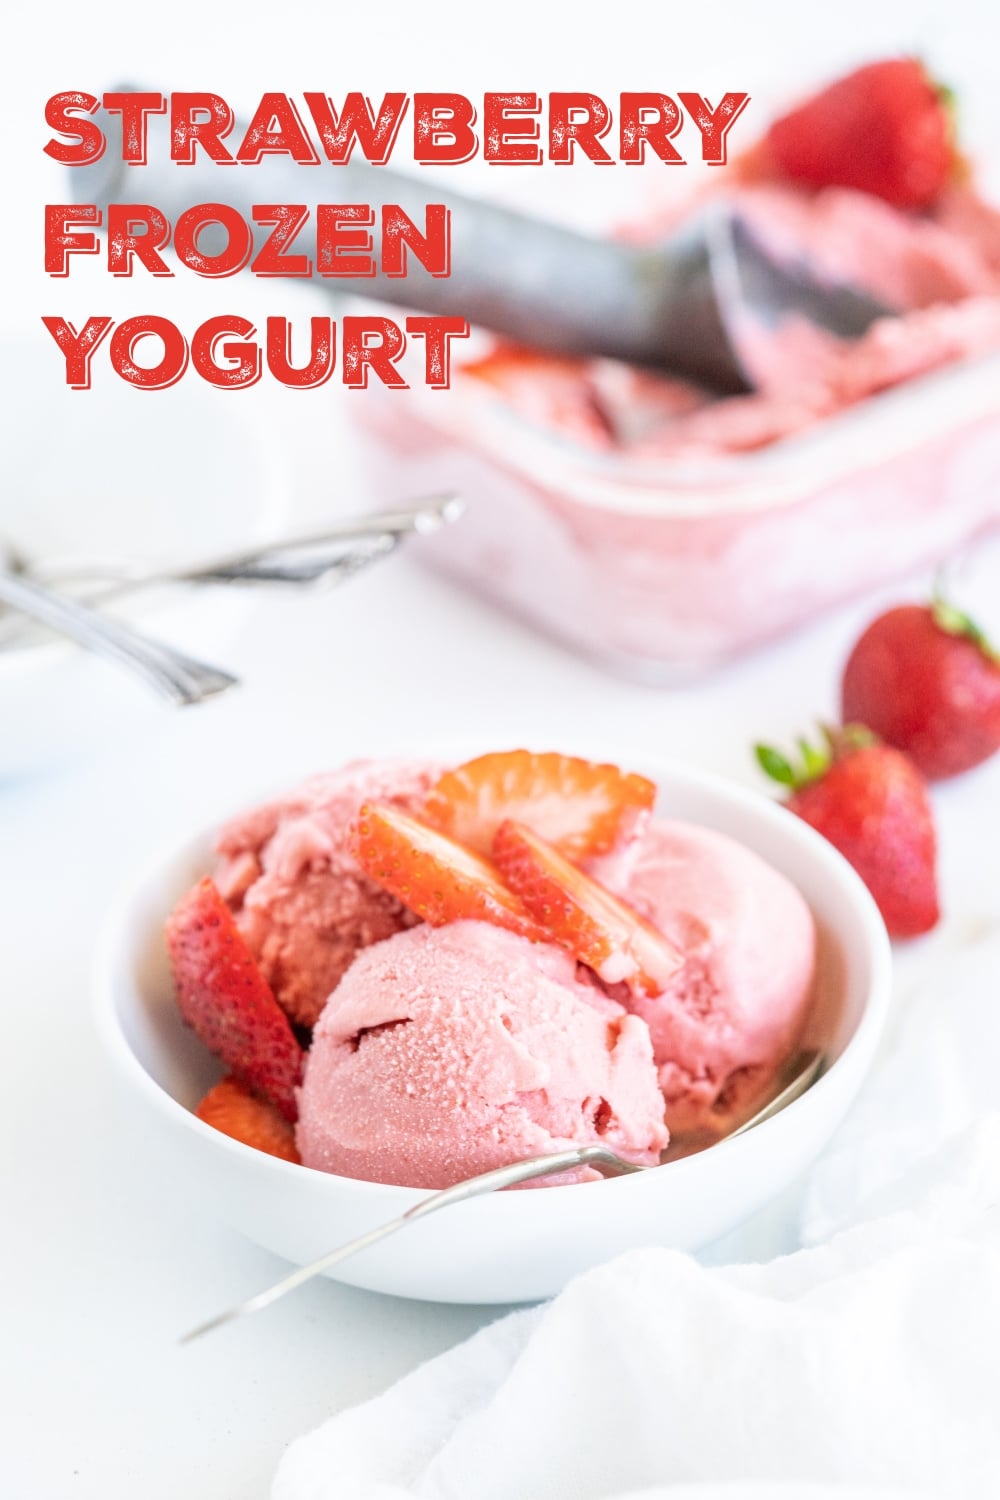 Looking for a healthier dessert option? Spend ten minutes making this delicious Strawberry Frozen Yogurt and enjoy every bite, minus the guilt.   via @cmpollak1